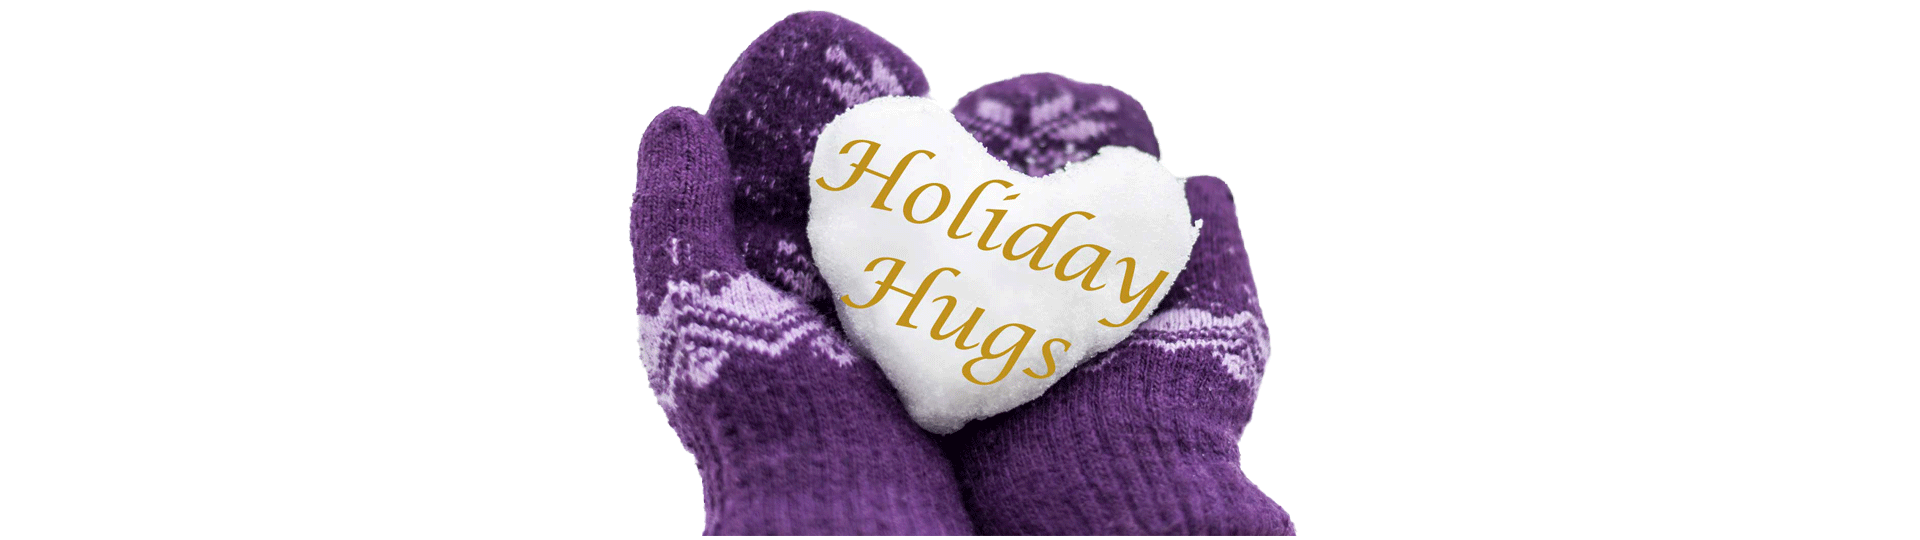 Holiday Hugs St. Andrew's Charitable Foundation